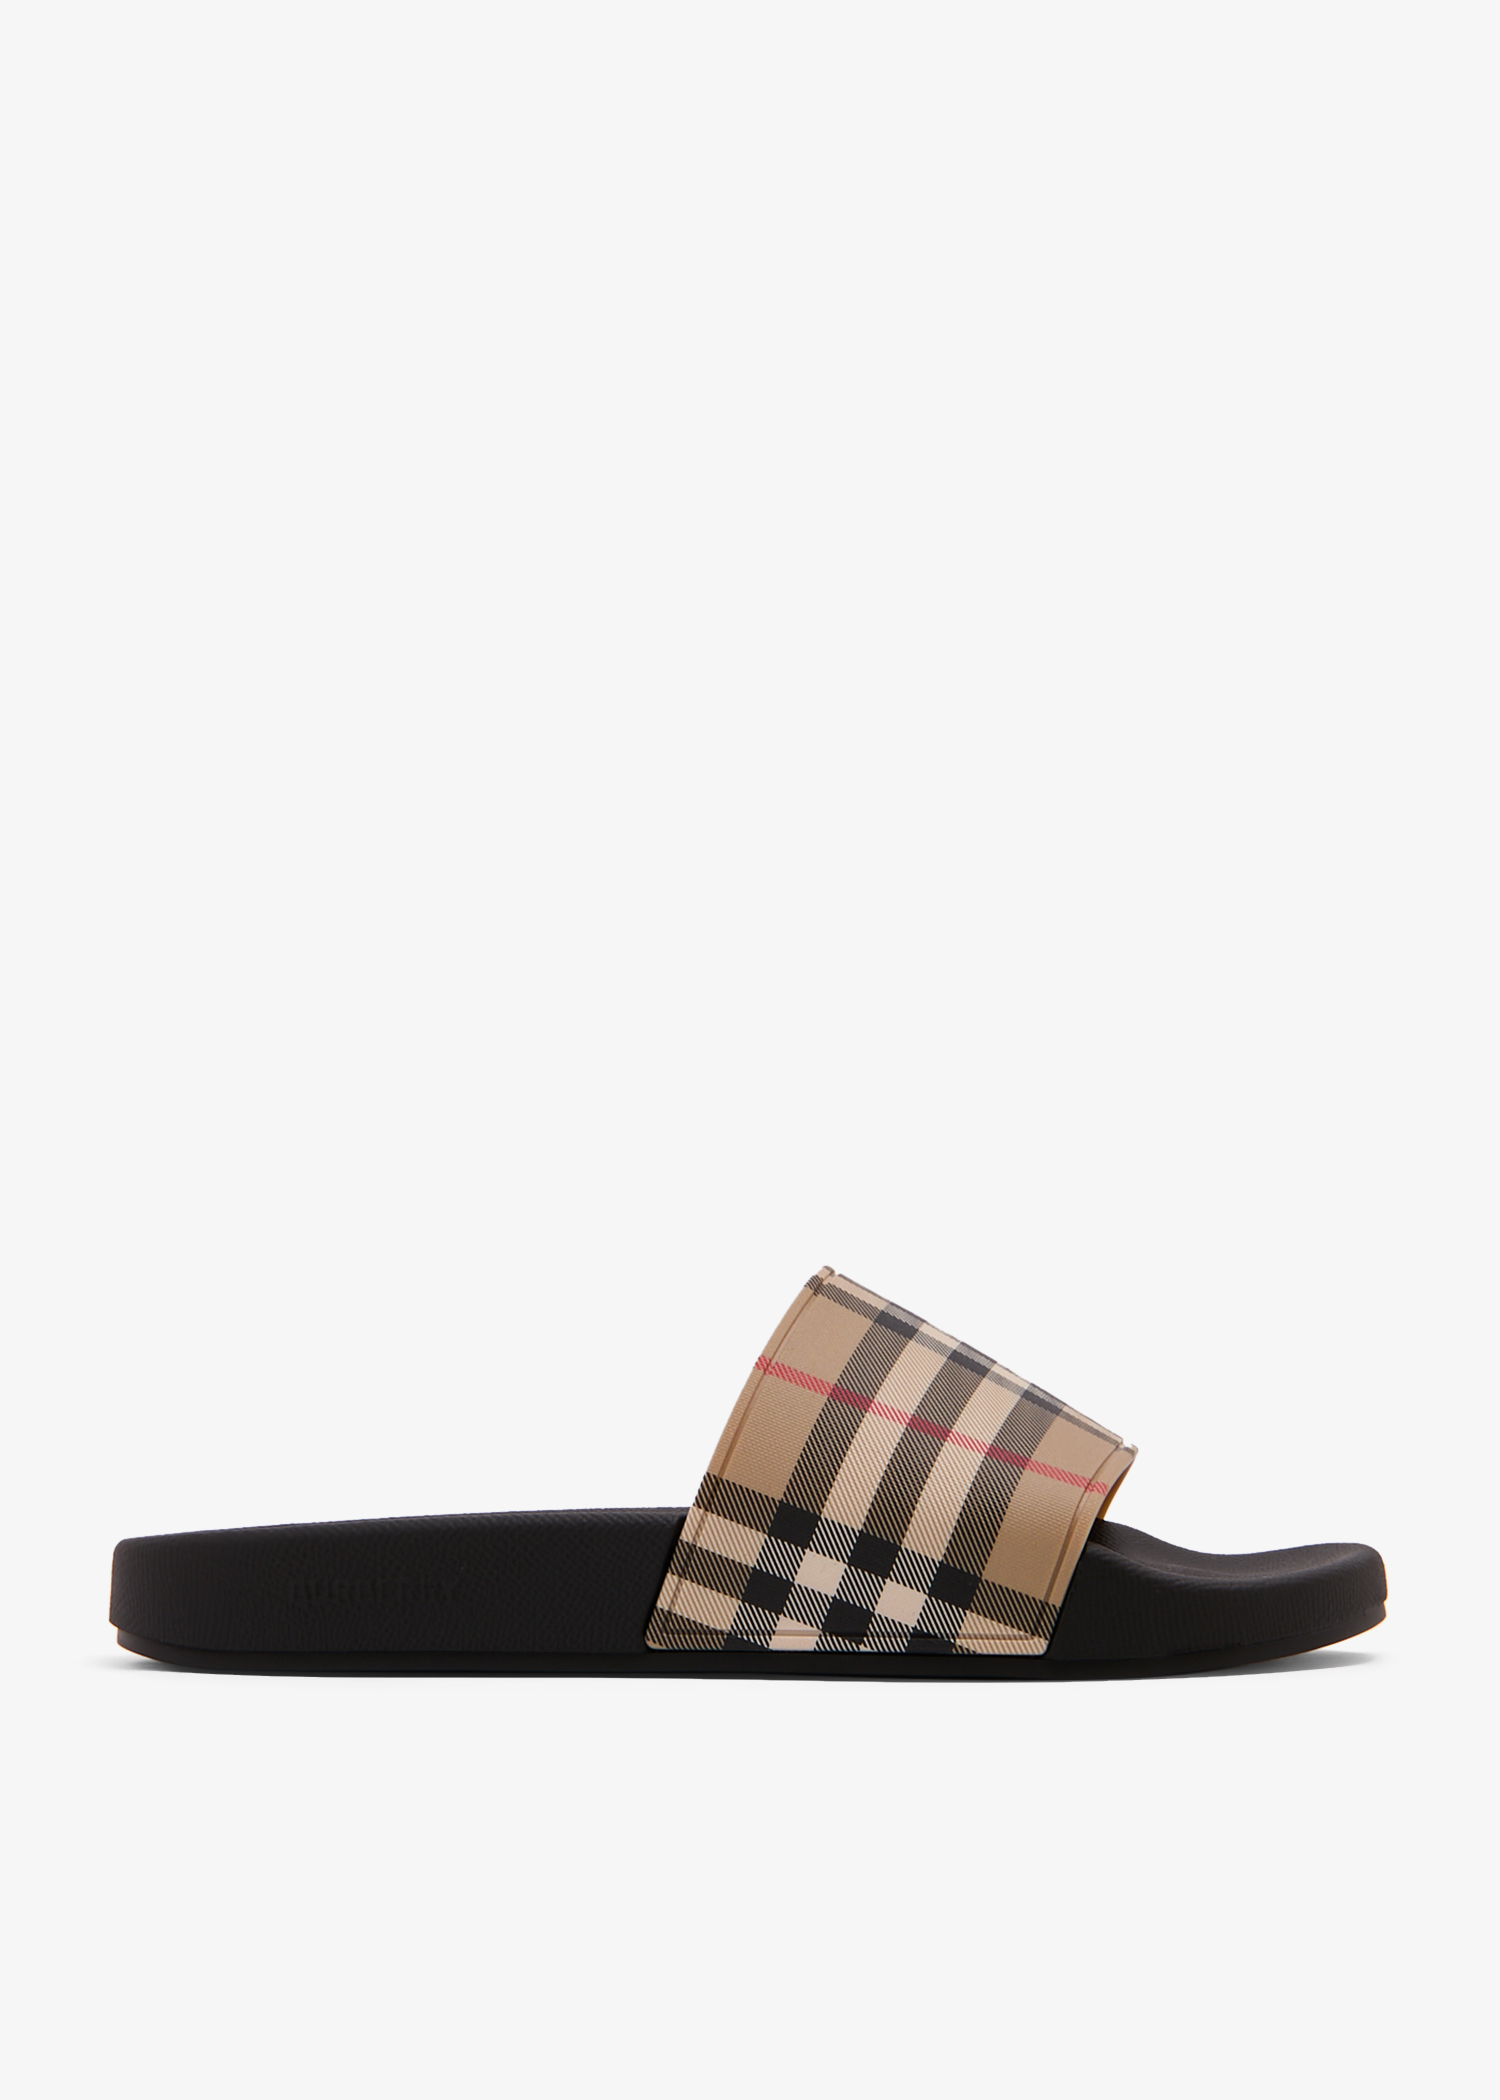 Burberry Furley slides for Women - Beige in UAE | Level Shoes